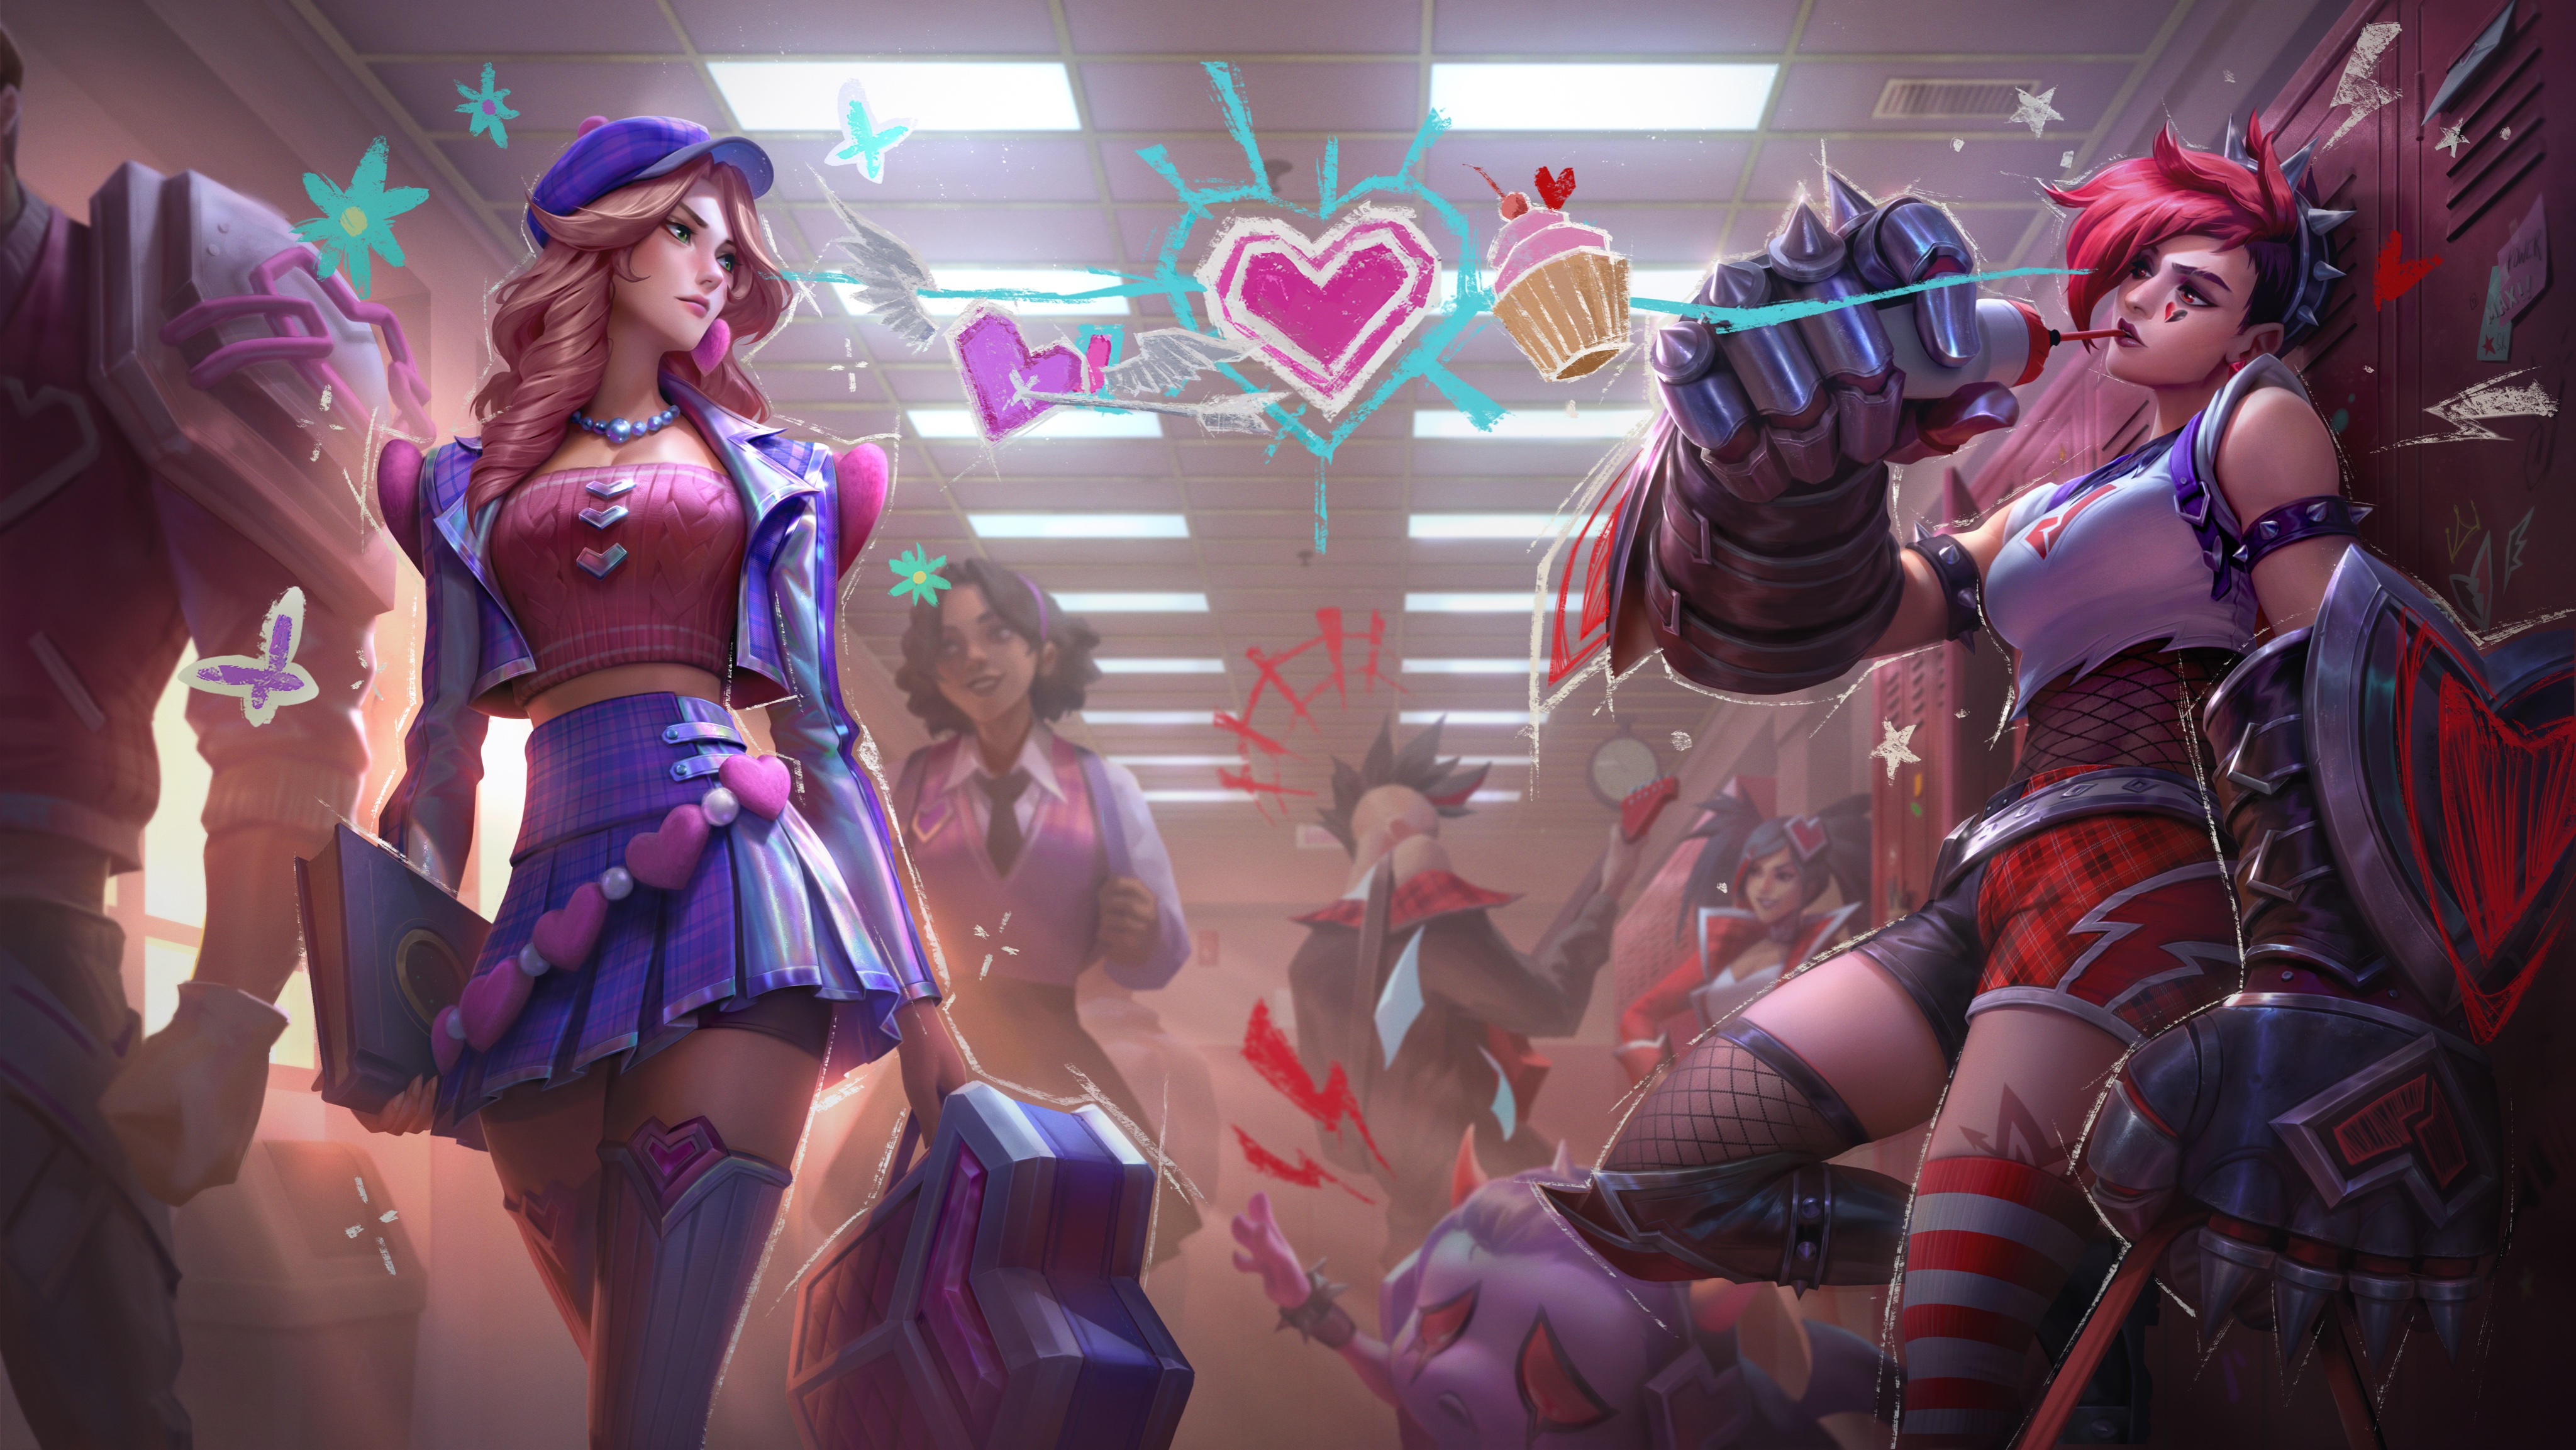 General 4096x2305 Vi (League of Legends) League of Legends Caitlyn (League of Legends) Heartthrob Caitlyn digital art thighs bewitching thighs